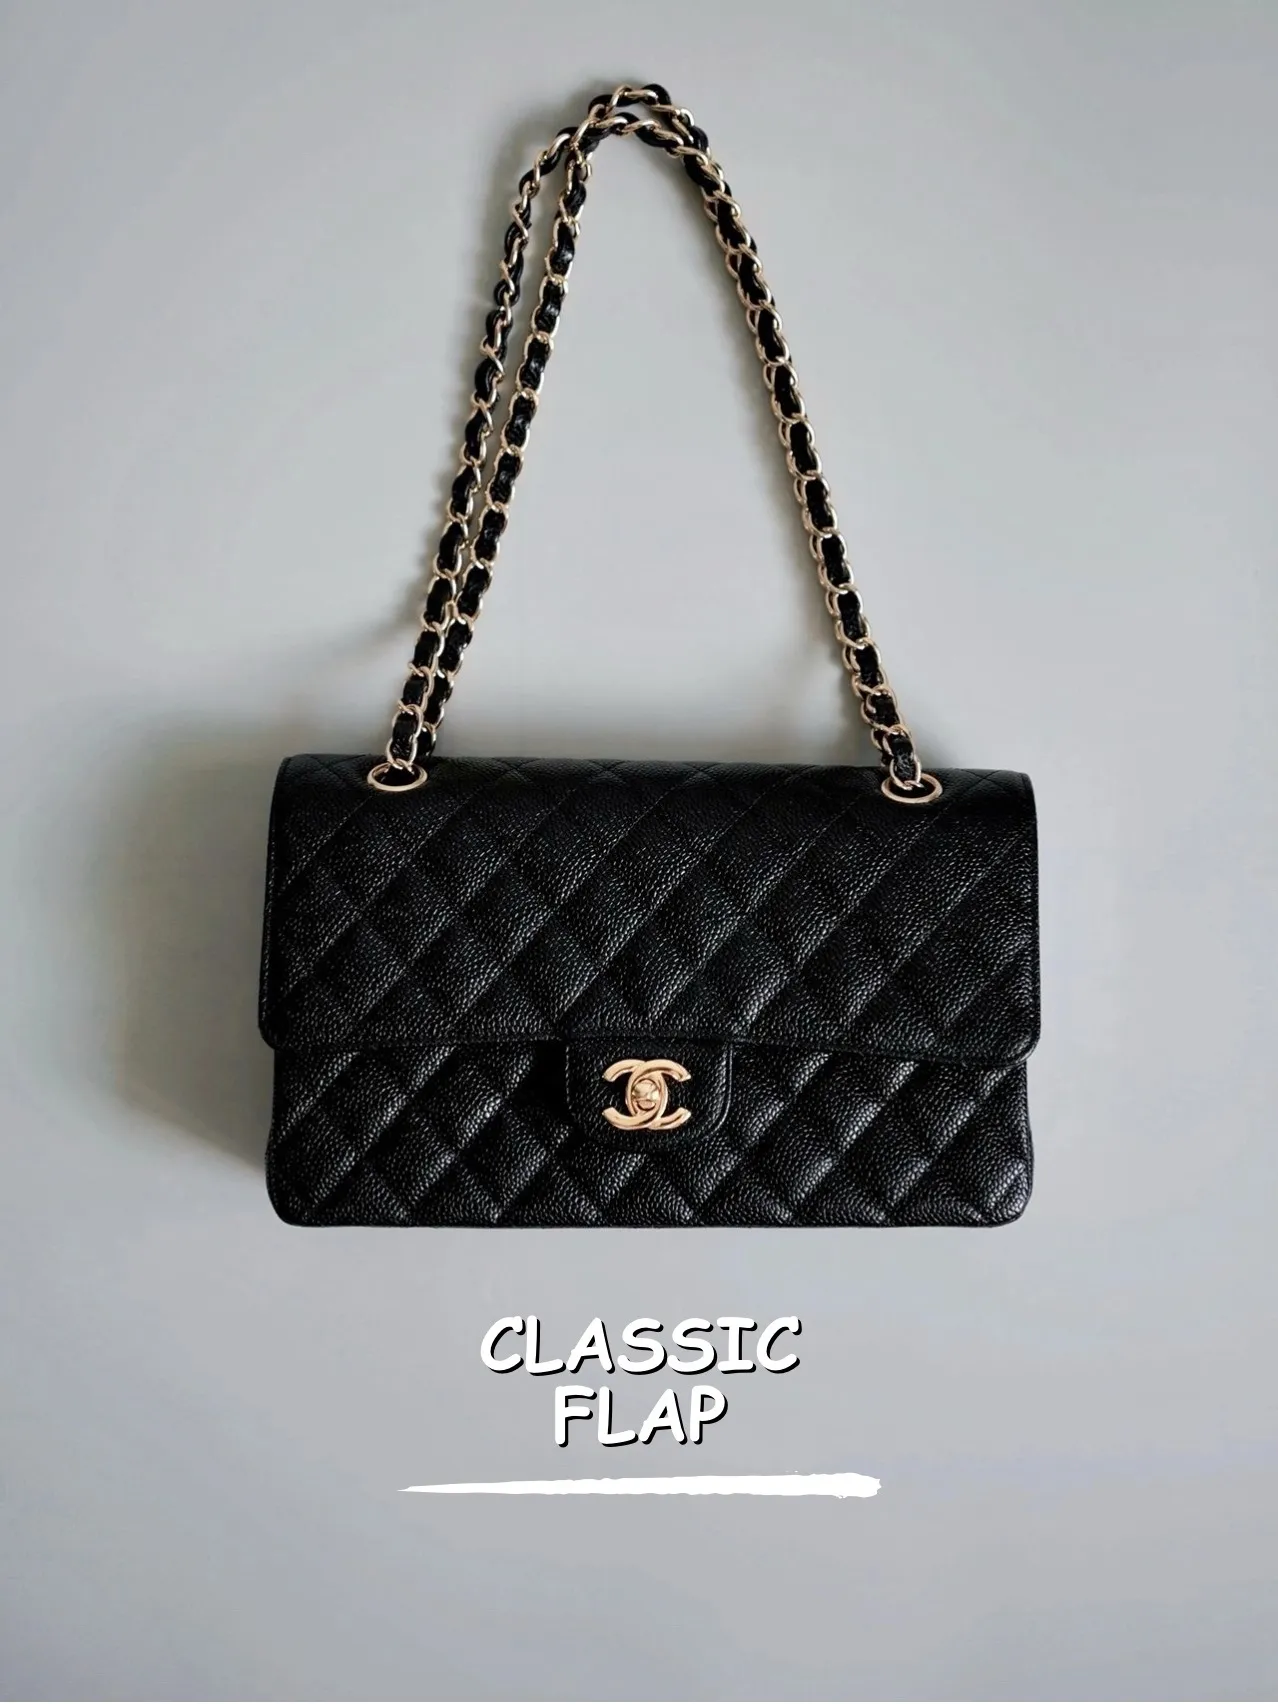 ⚫️Chanel Medium Flap Bag Review- the most classic👜